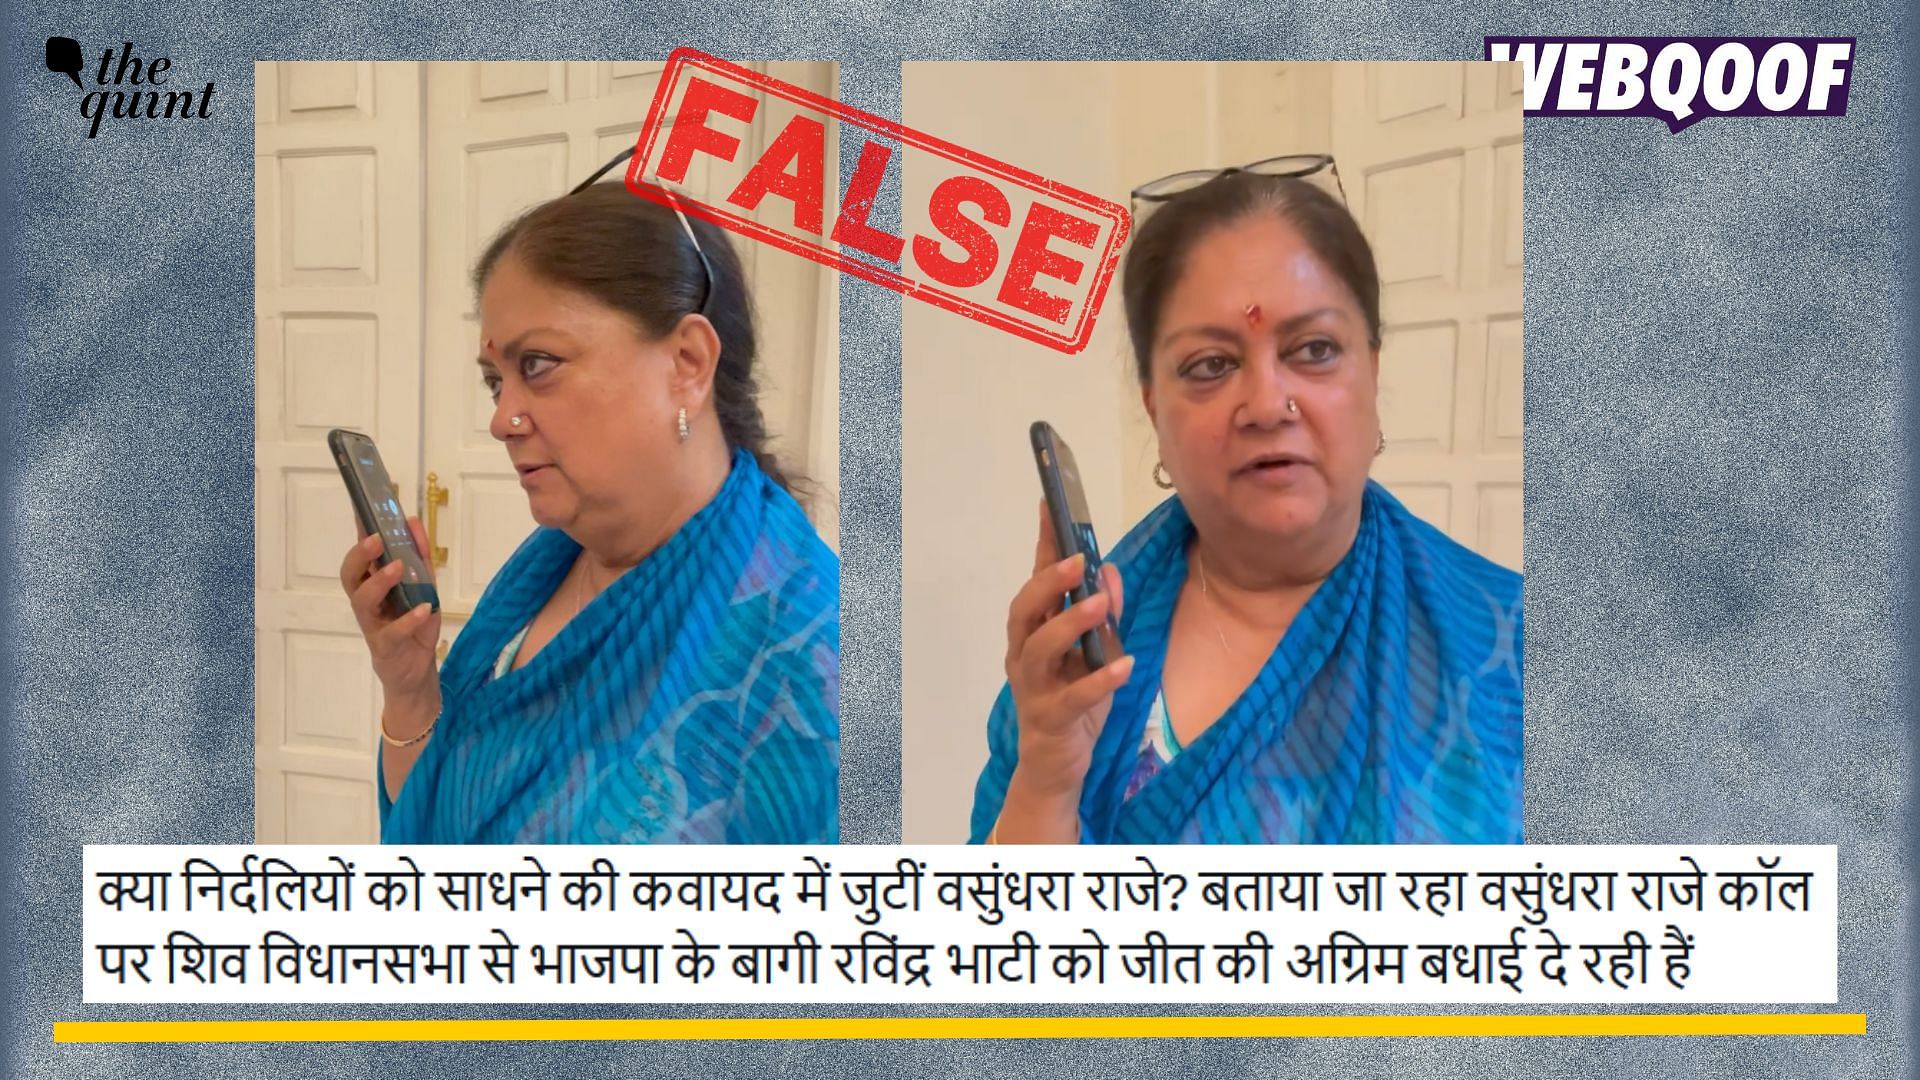 <div class="paragraphs"><p>Fact-check: An old video of Vasundhara Raje congratulating someone over the phone is being falsely linked to the recent Rajasthan assembly elections. </p></div>